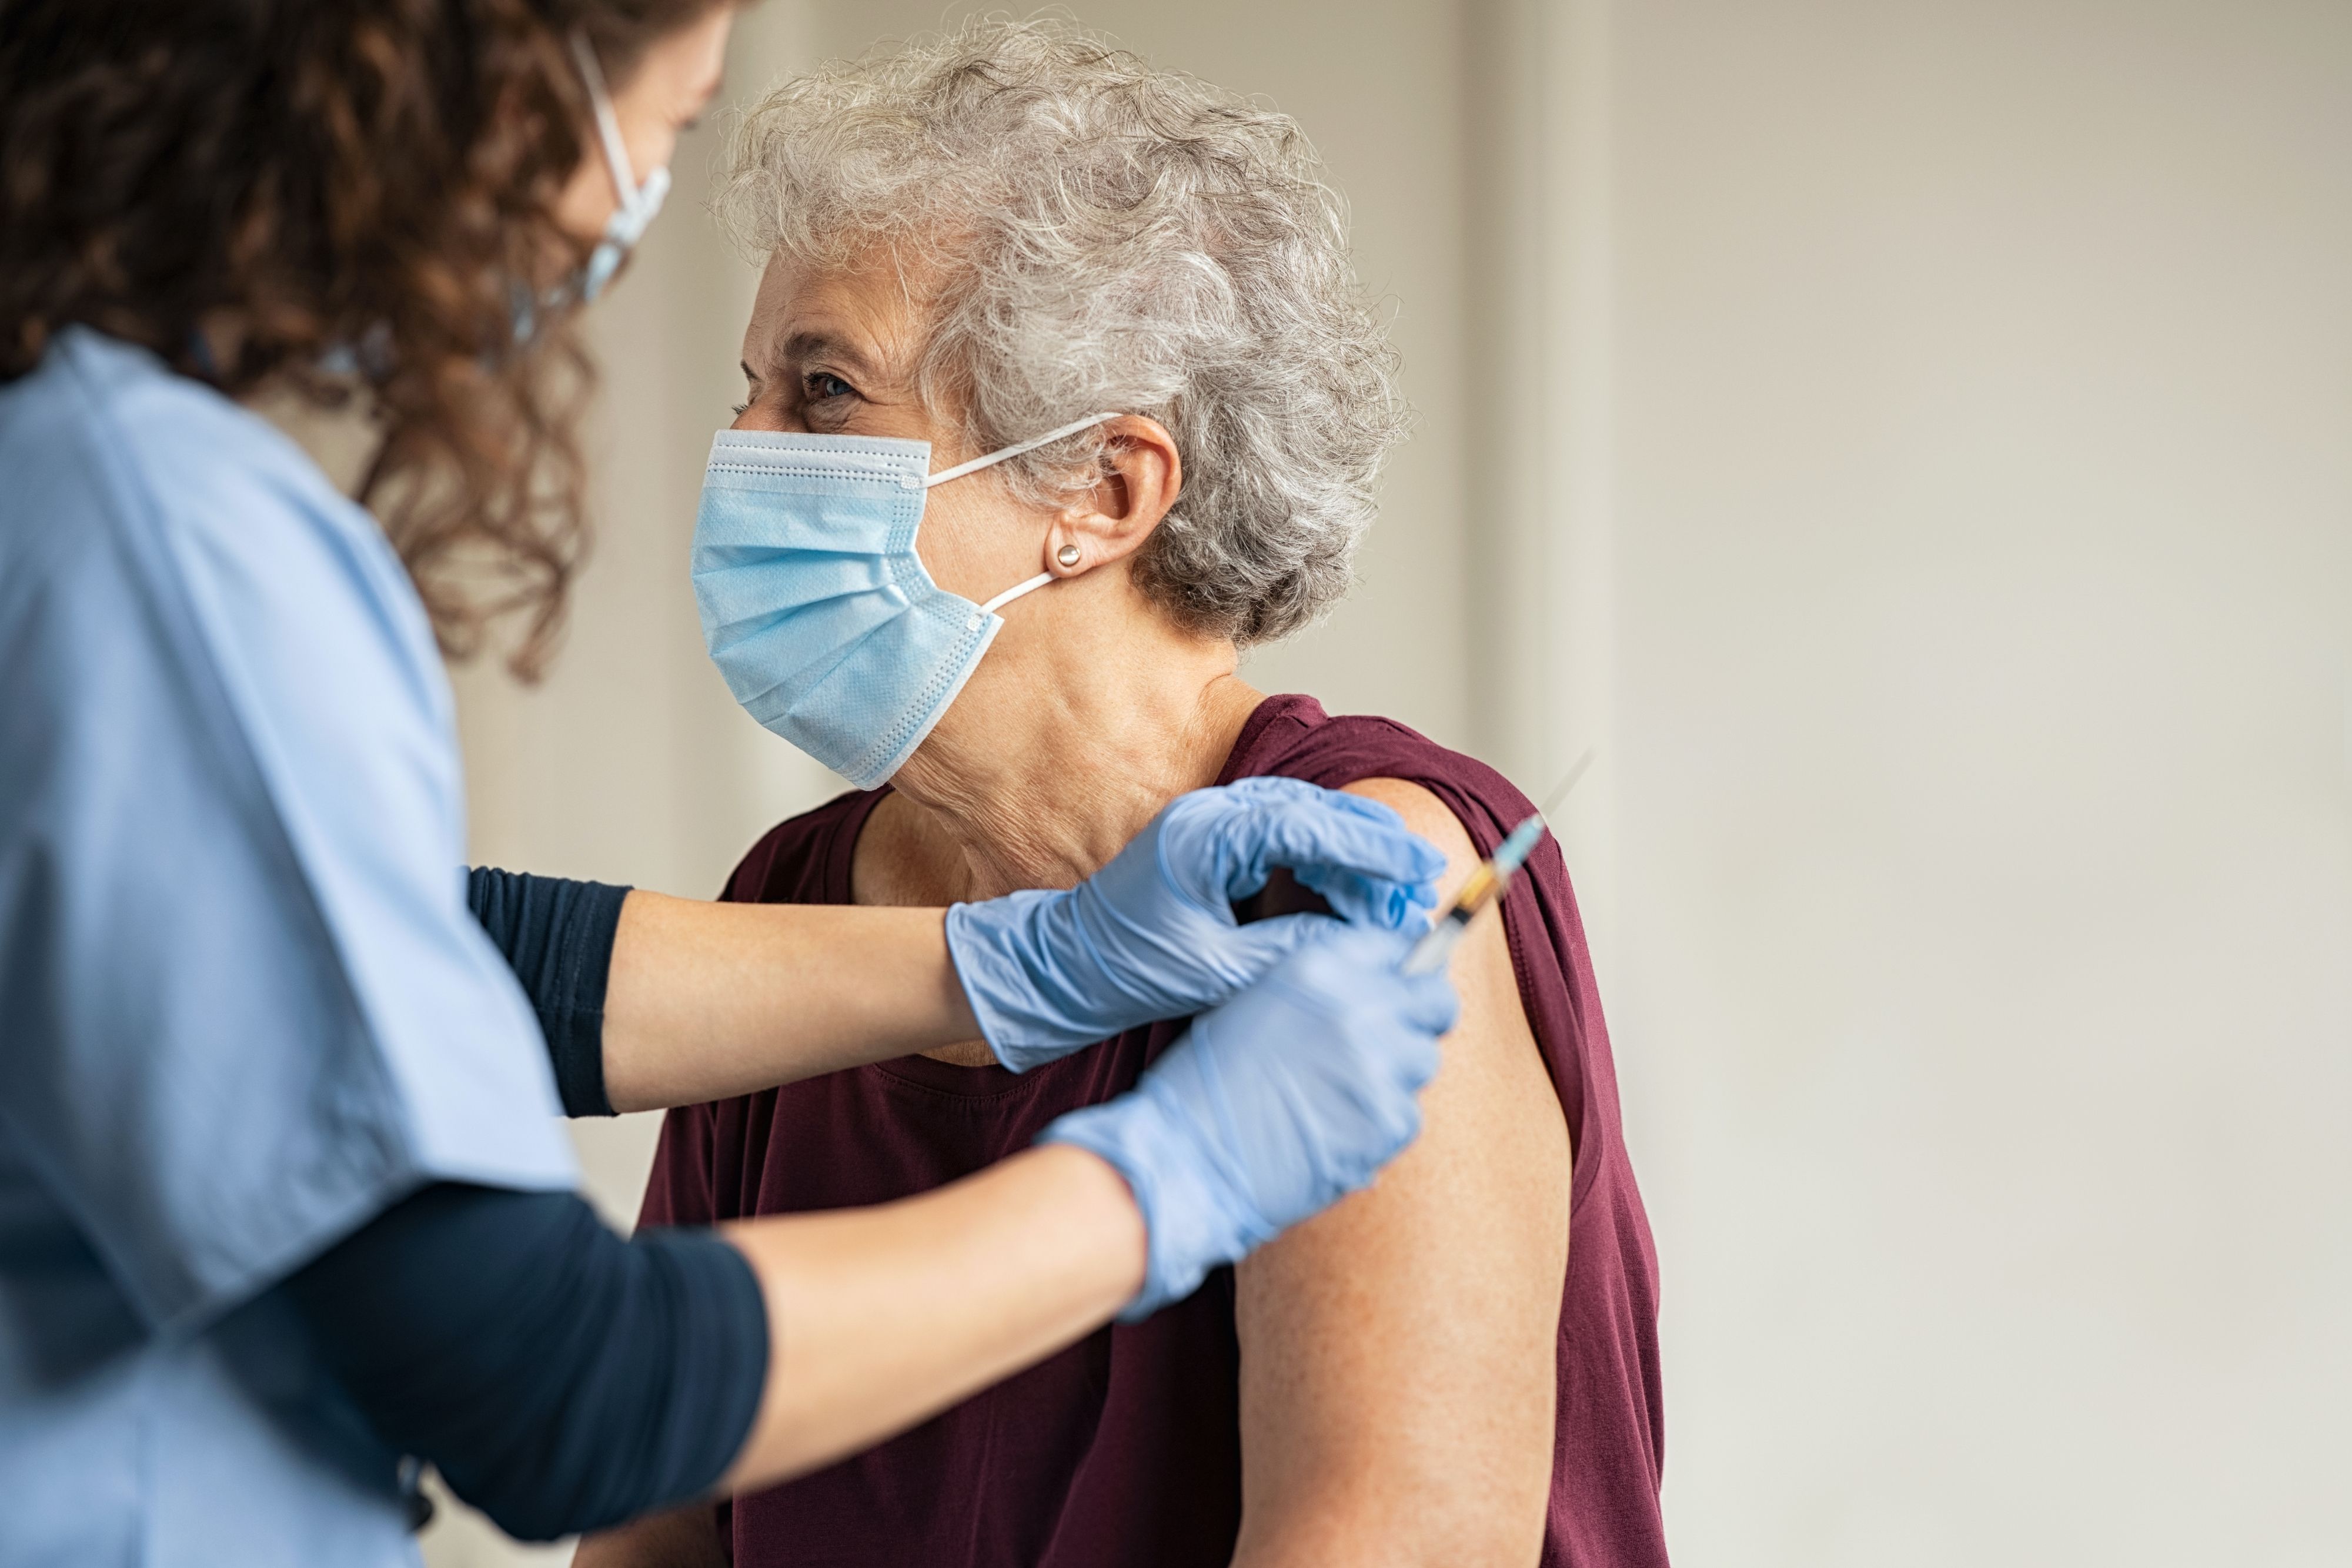 Whether—and how—companies should offer the now proven vaccine to trial volunteers who received a placebo is a complex issue. Image by Rido / Shutterstock. Undated.